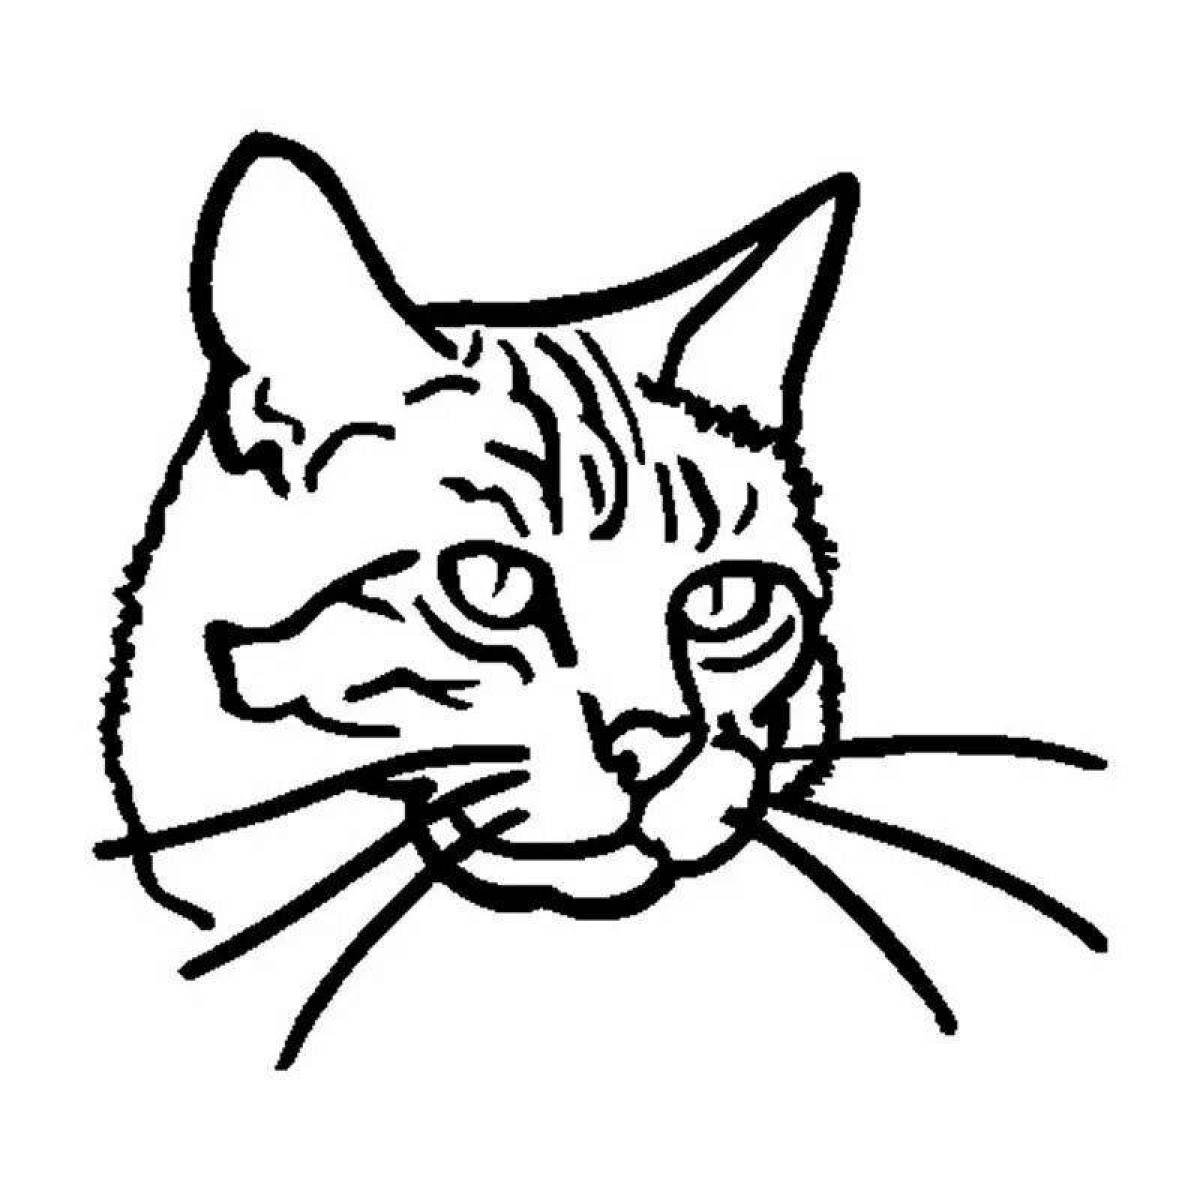 Animated cat face coloring page